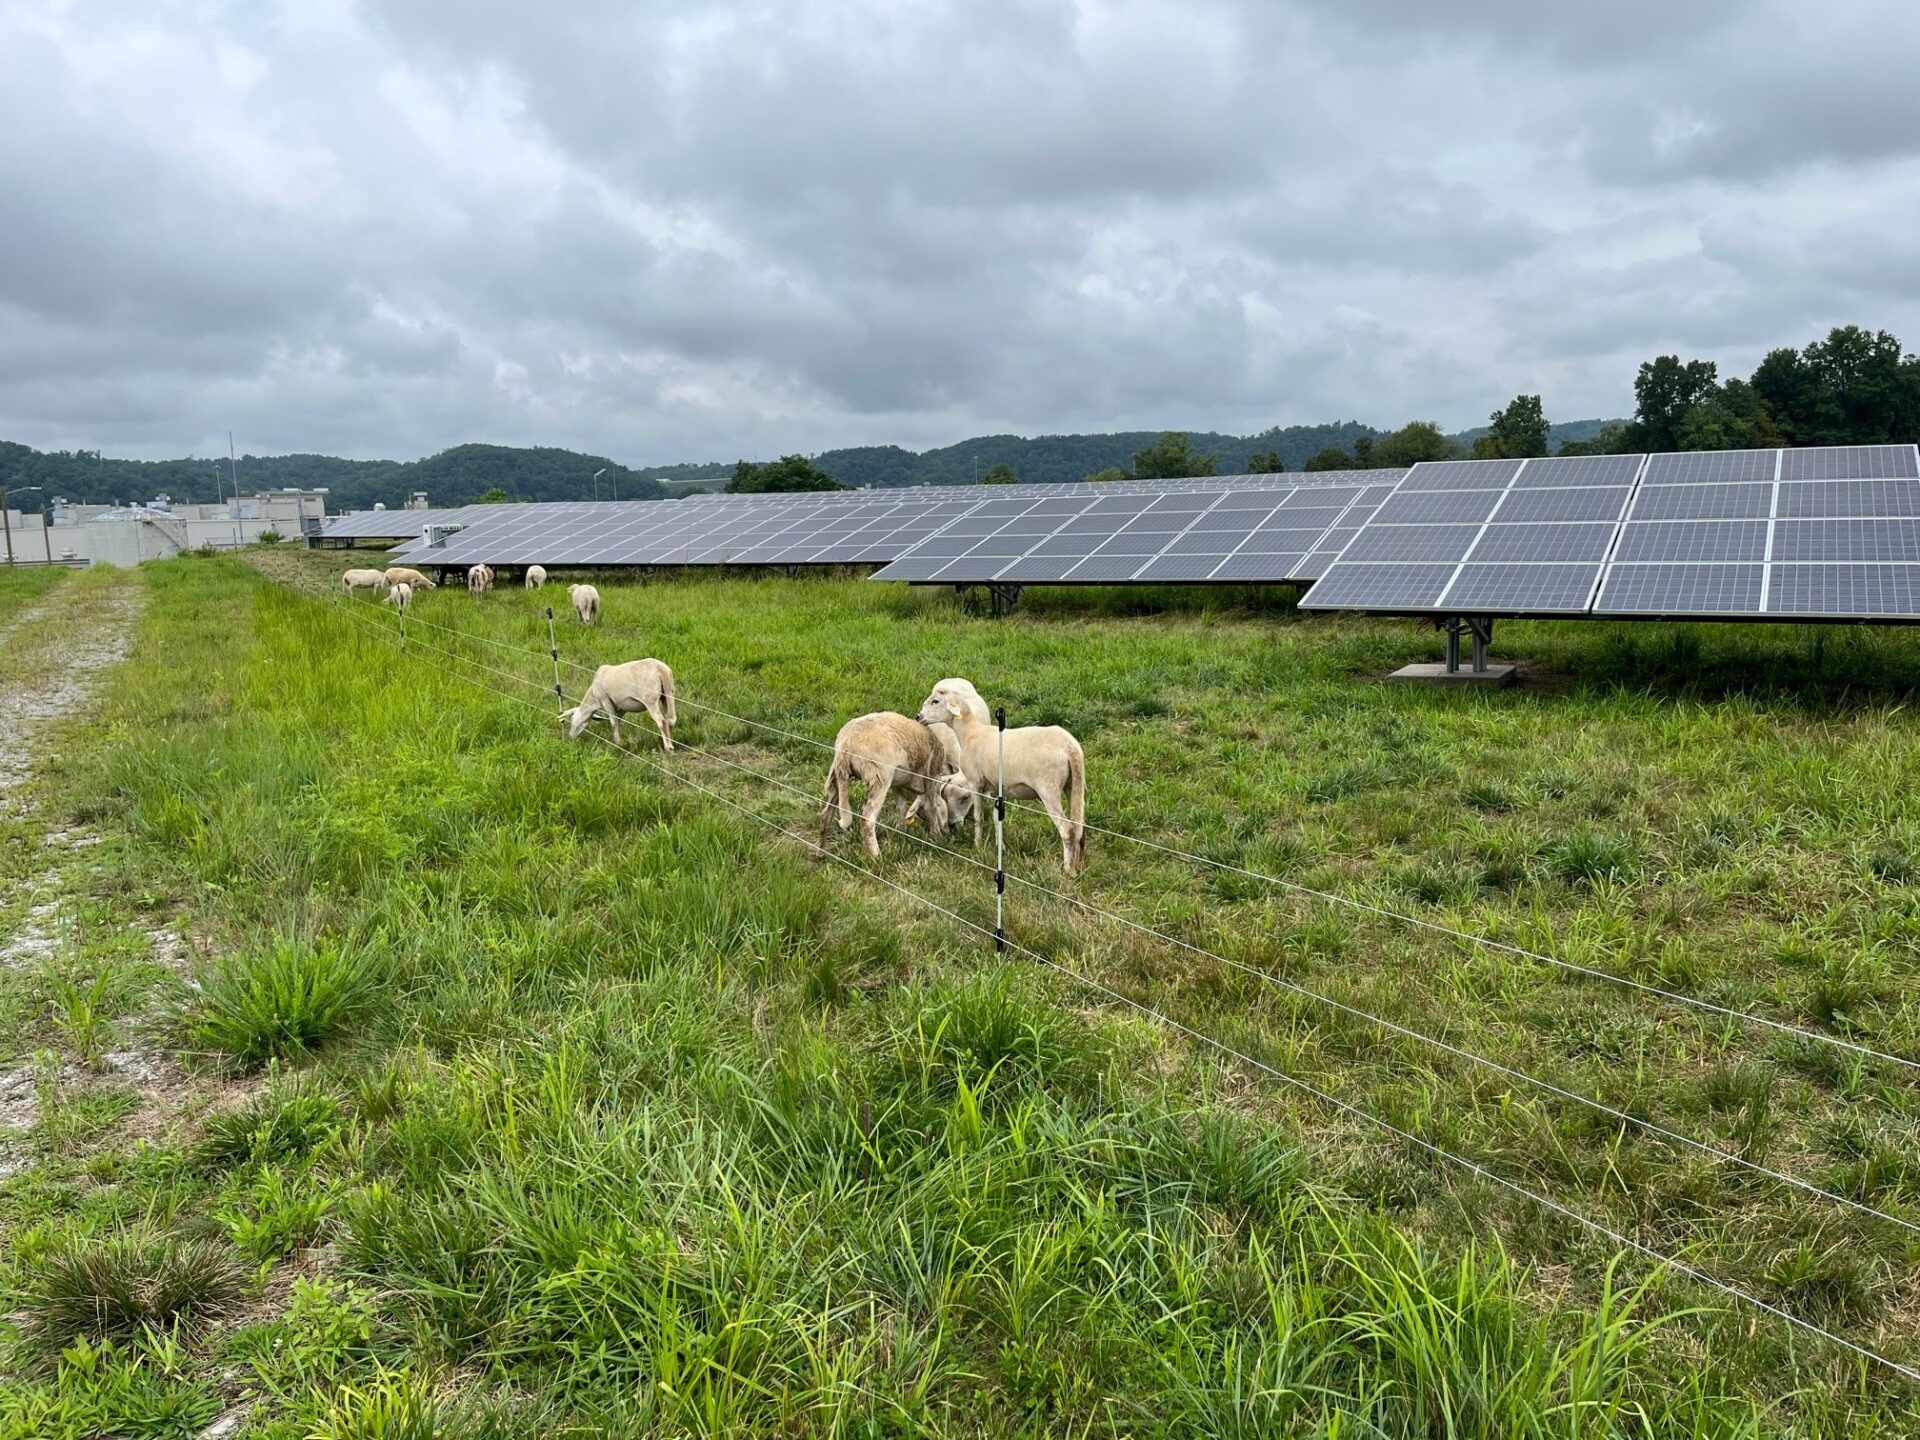 These Sheep Have A Green Job: Eating The Grass At Toyota’s Solar Farm